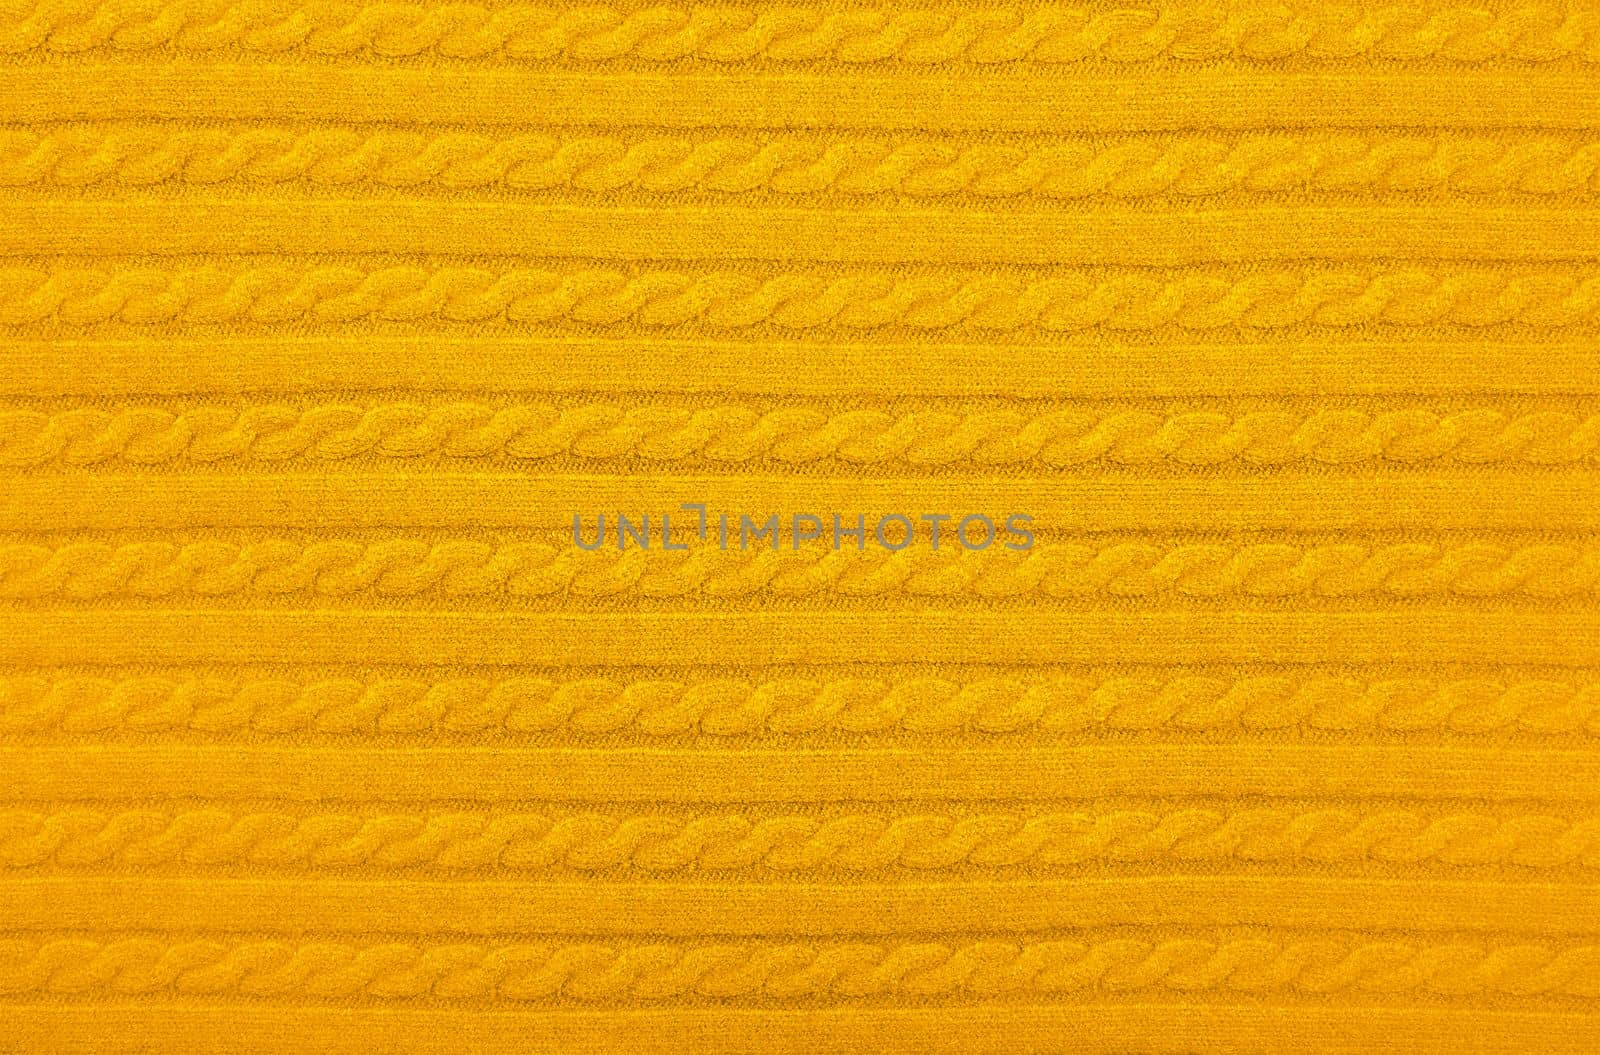 Background texture of yellow knitted wool fabric by BreakingTheWalls